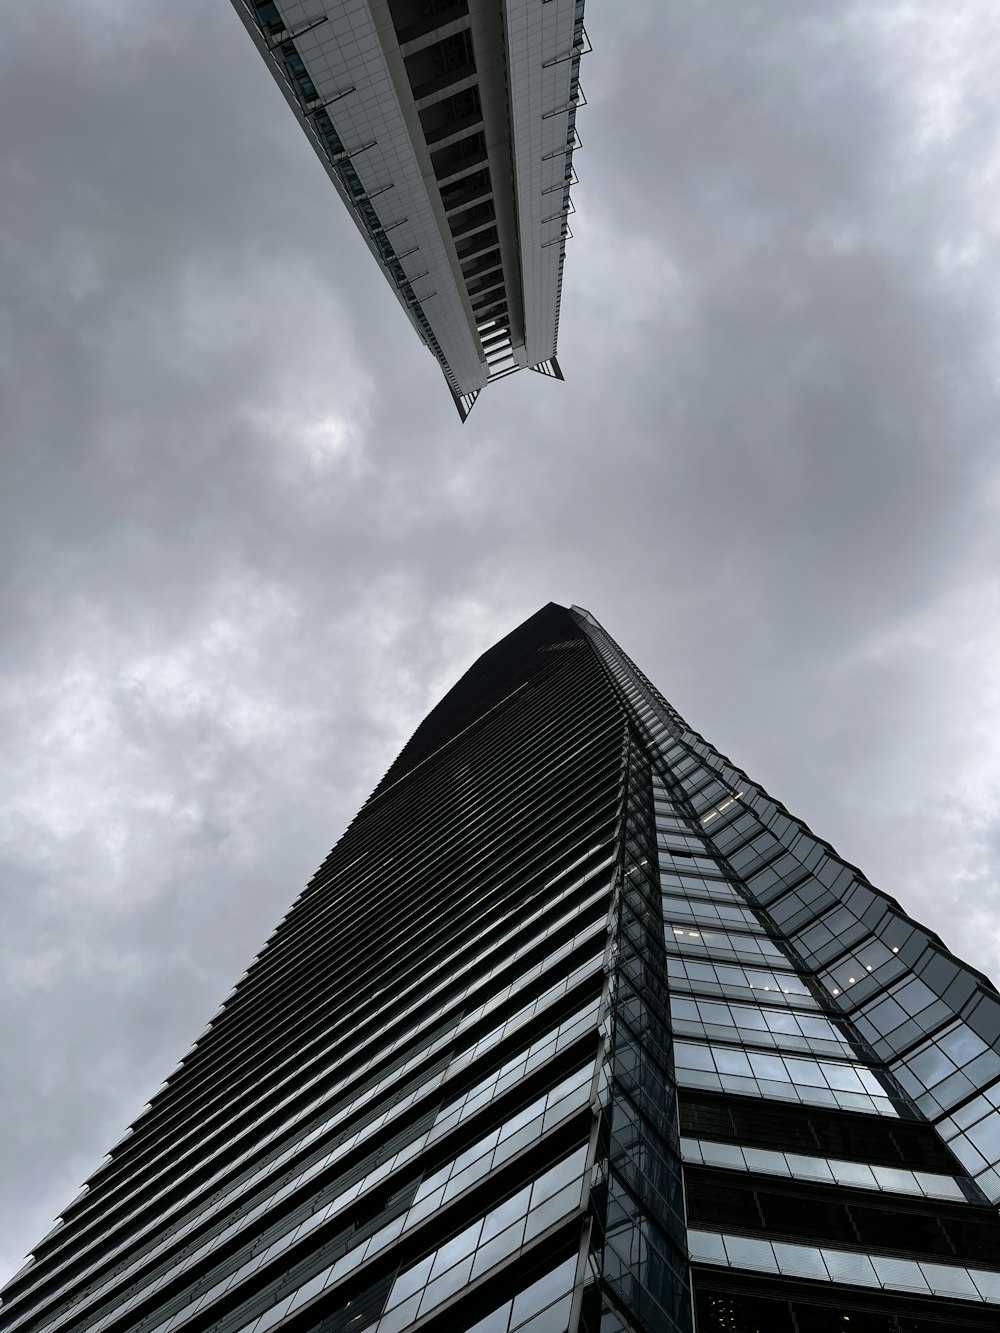 looking up at a tall skyscraper in a cloudy sky